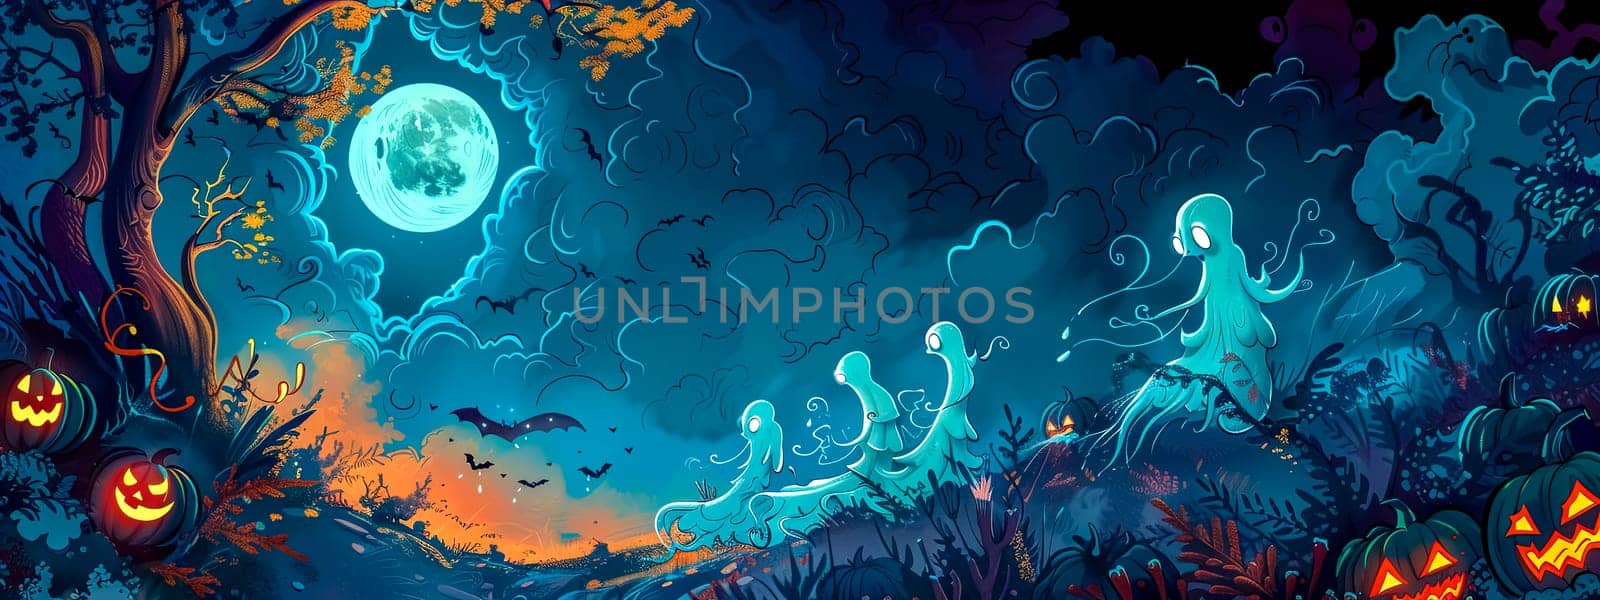 Whimsical and festive enchanted halloween night panorama illustration with spooky ghosts, glowing jack o' lanterns, and a full moon in a magical, eerie, and creepy nocturnal landscape scene